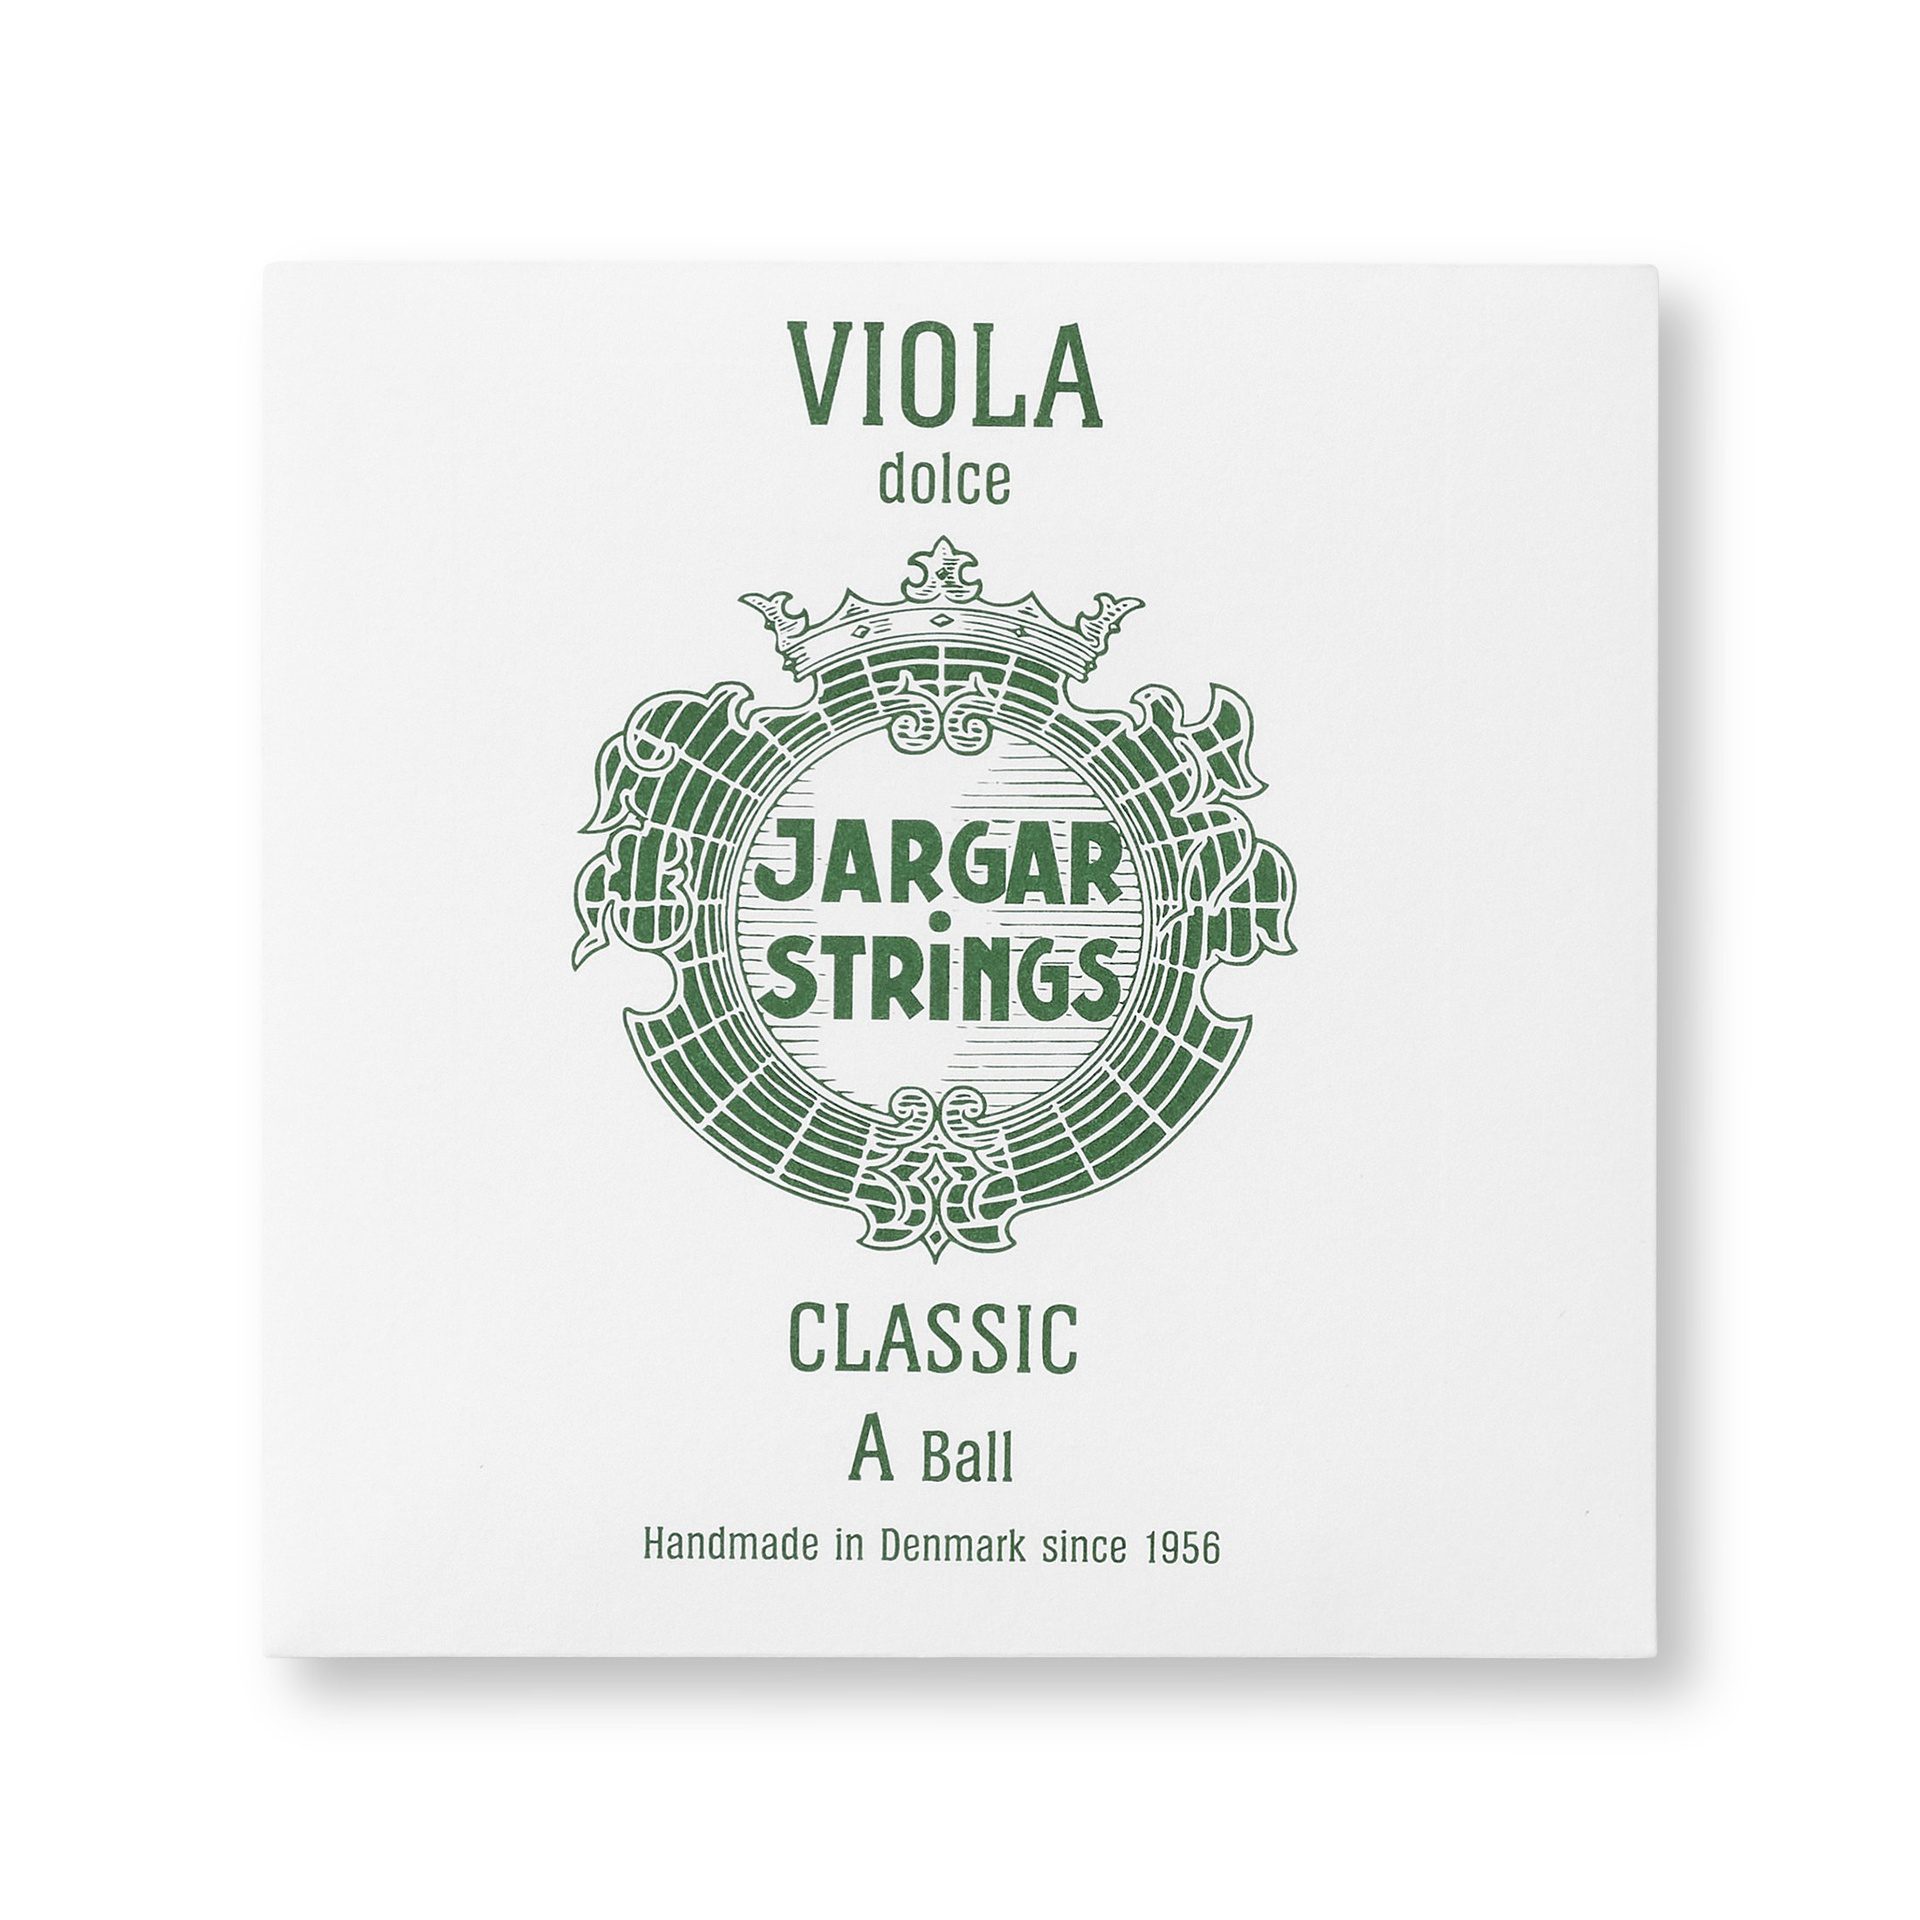 Classic Viola - Dolce, Single A String, 4/4